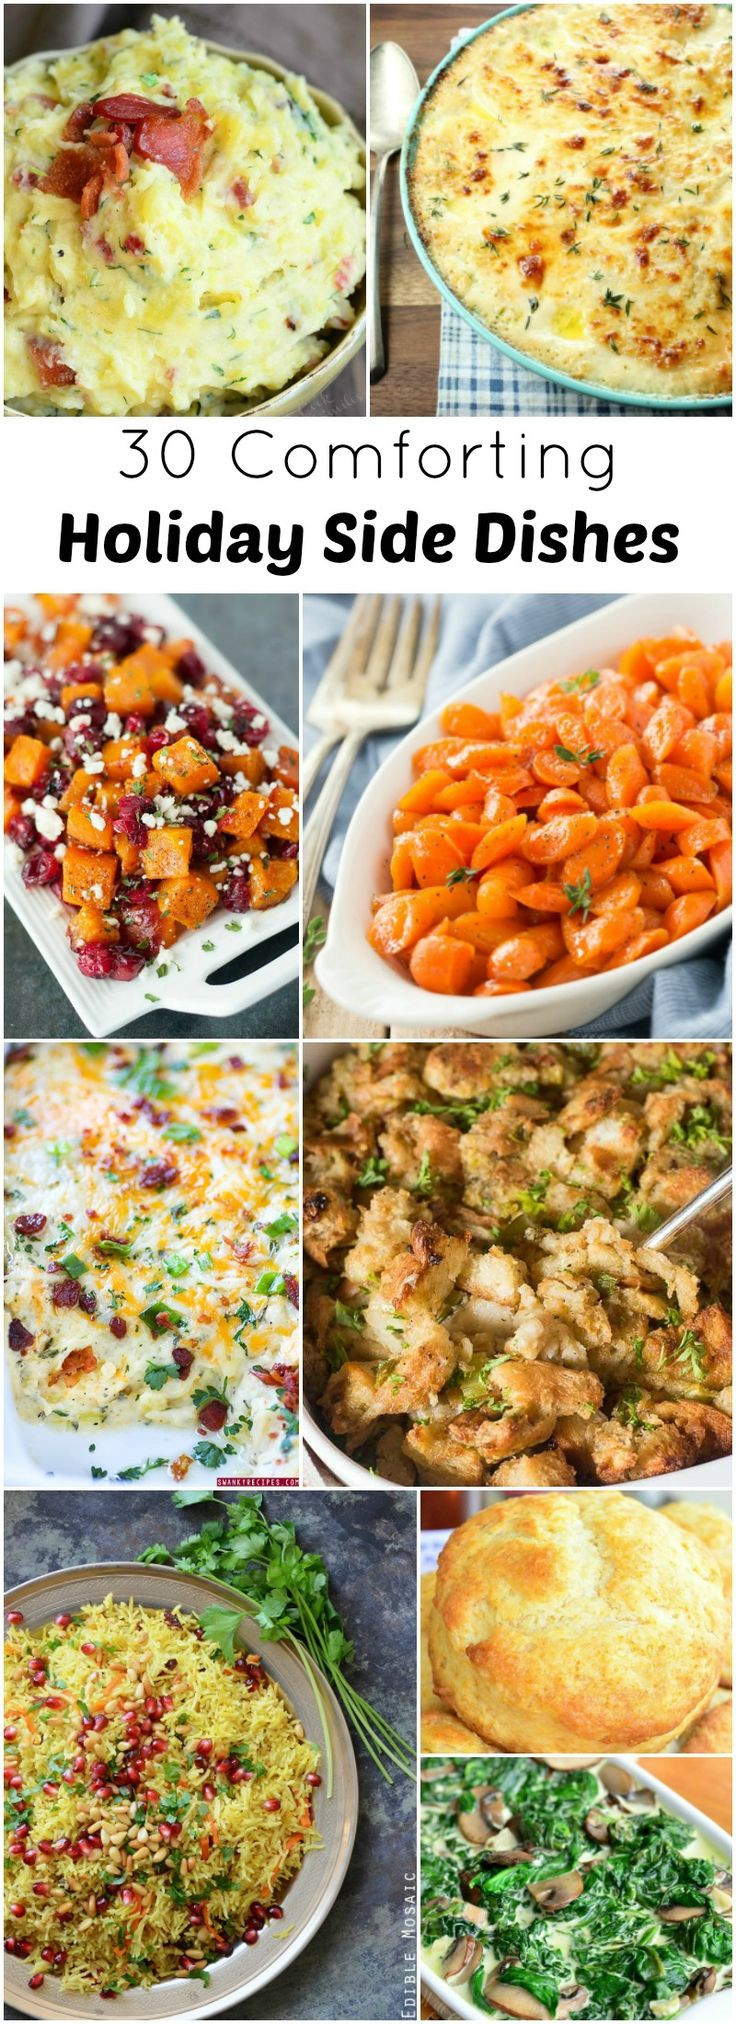 Side Dishes Christmas
 Best 20 Holiday Side Dishes ideas on Pinterest